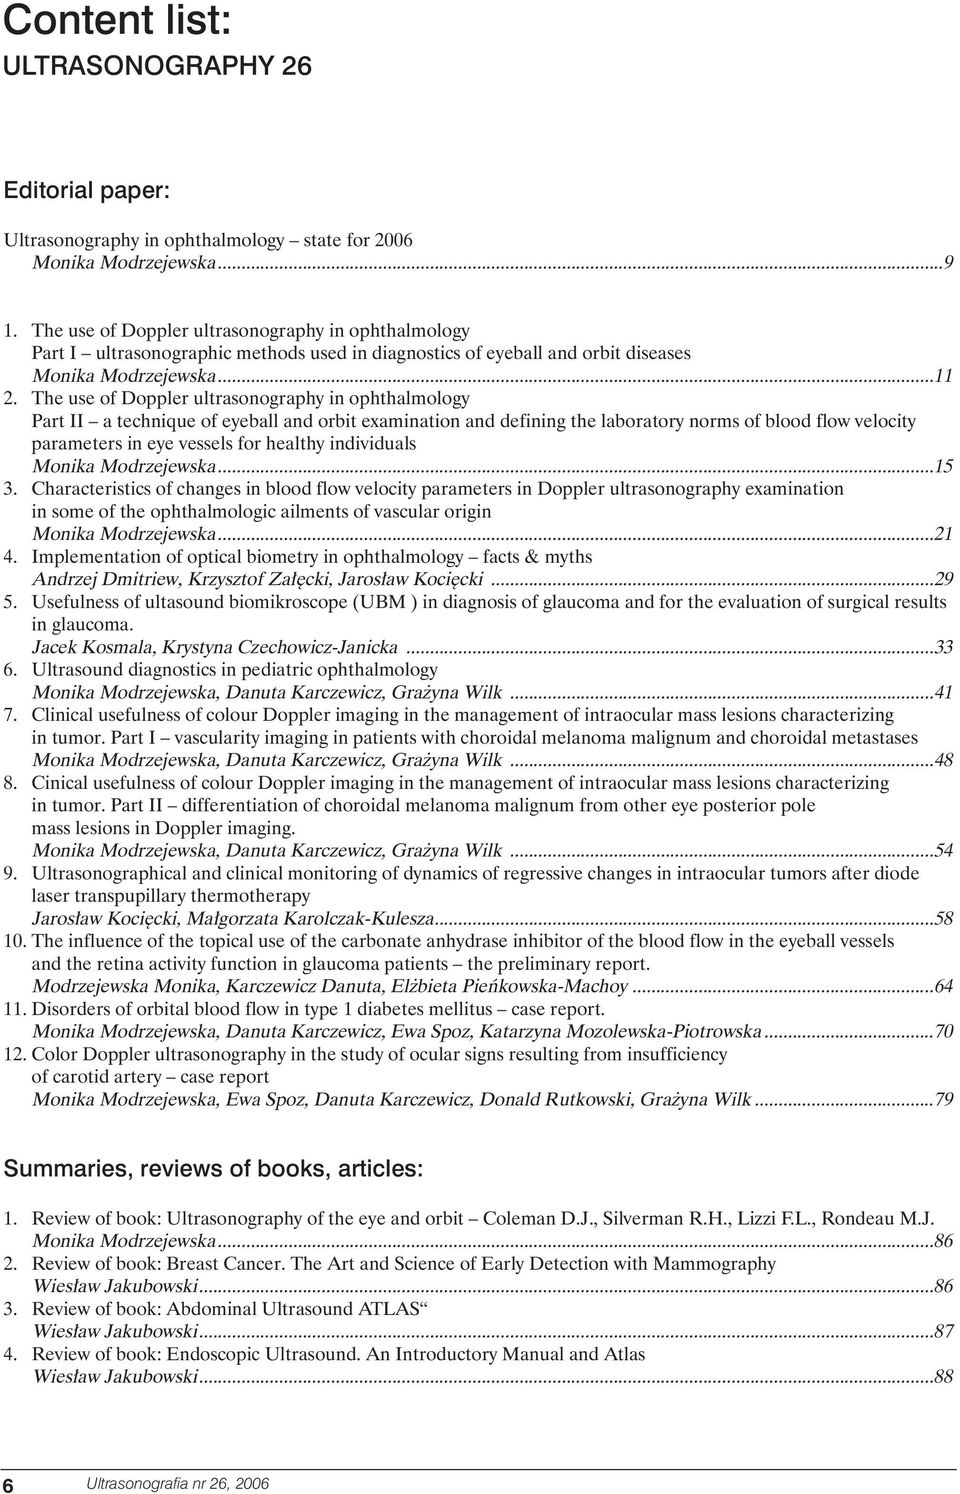 The use of Doppler ultrasonography in ophthalmology Part II a technique of eyeball and orbit examination and defining the laboratory norms of blood flow velocity parameters in eye vessels for healthy